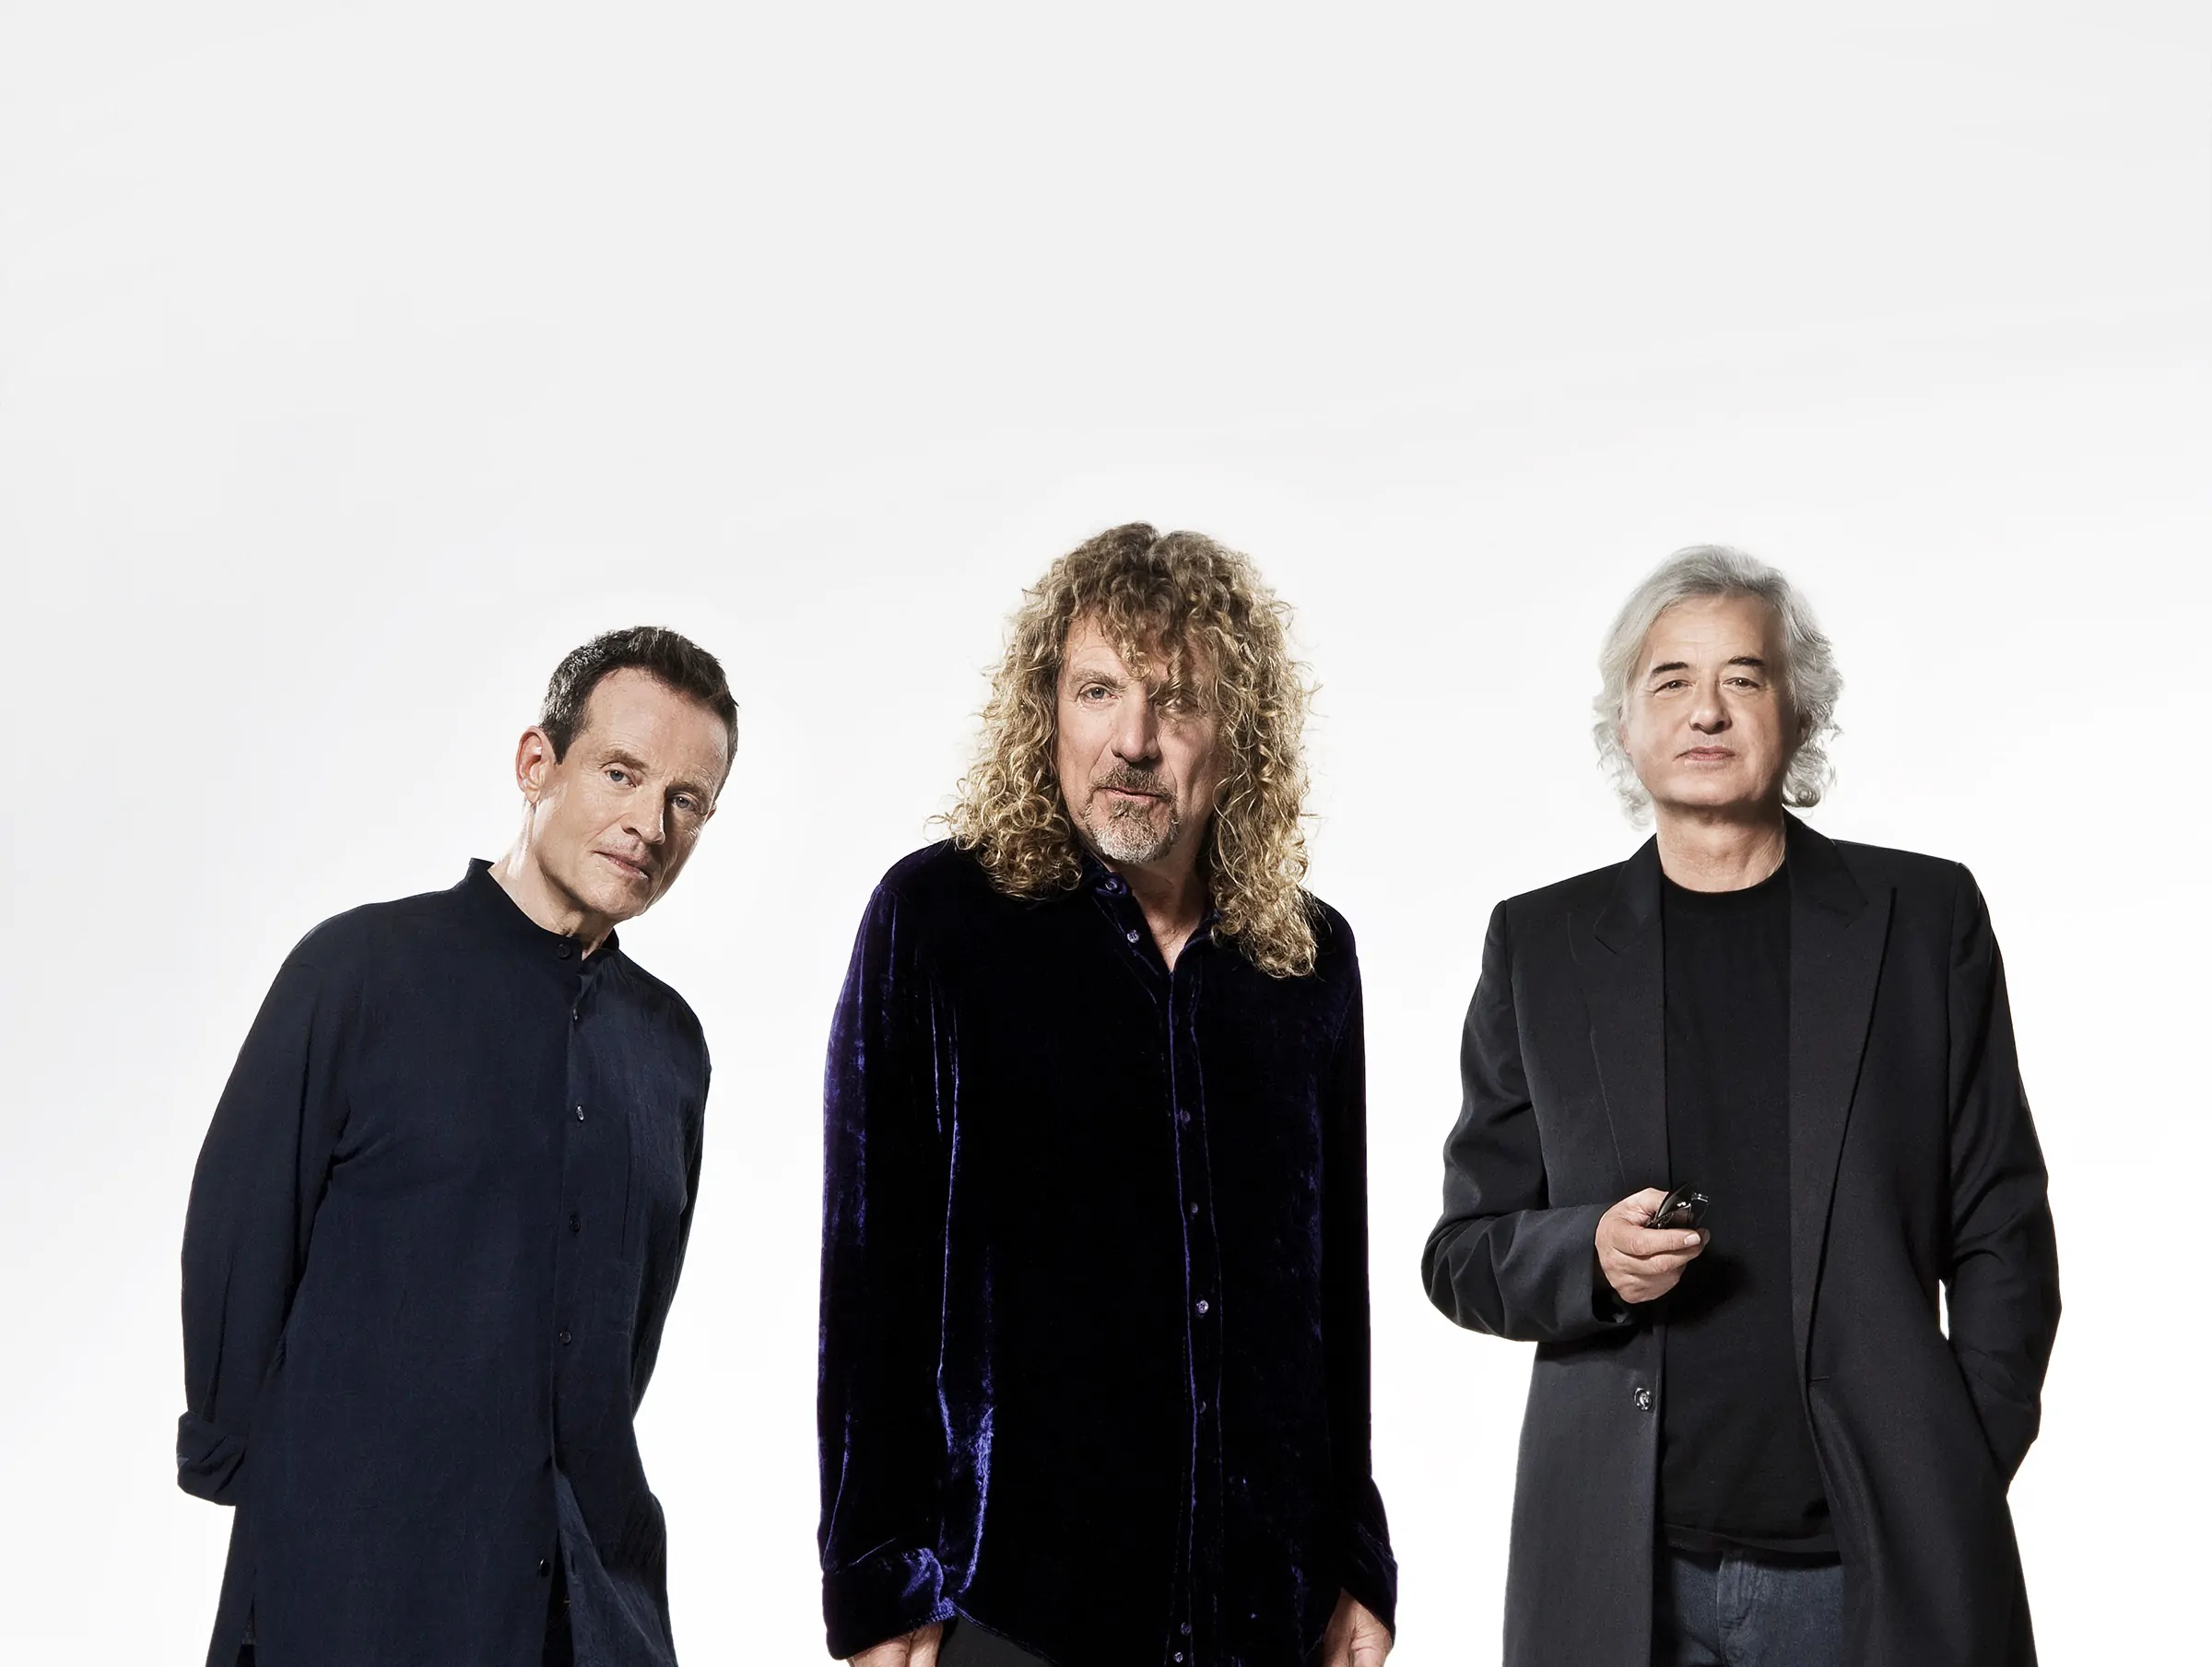 LED ZEPPELIN to stream ‘Celebration Day’ exclusively on YouTube this Saturday, May 30th